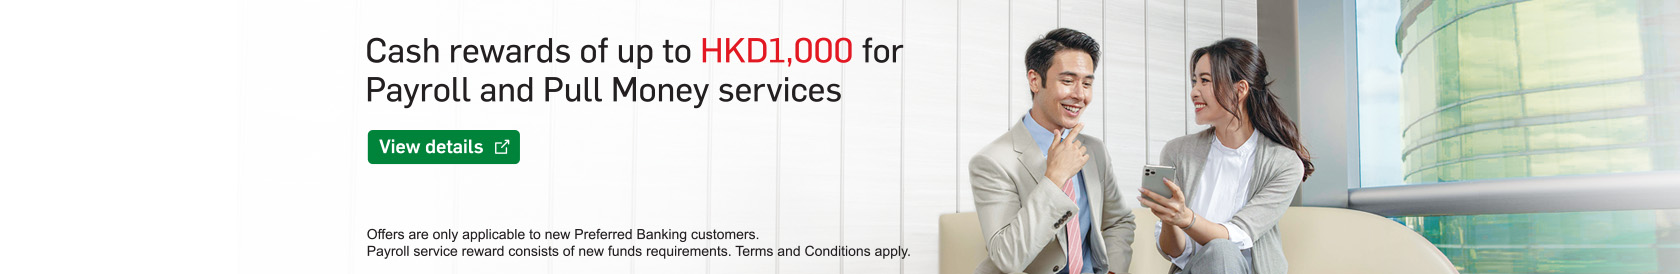 View details. A cash reward of up to HK1,000 for Payroll and Pull Money services. Opens in a new window